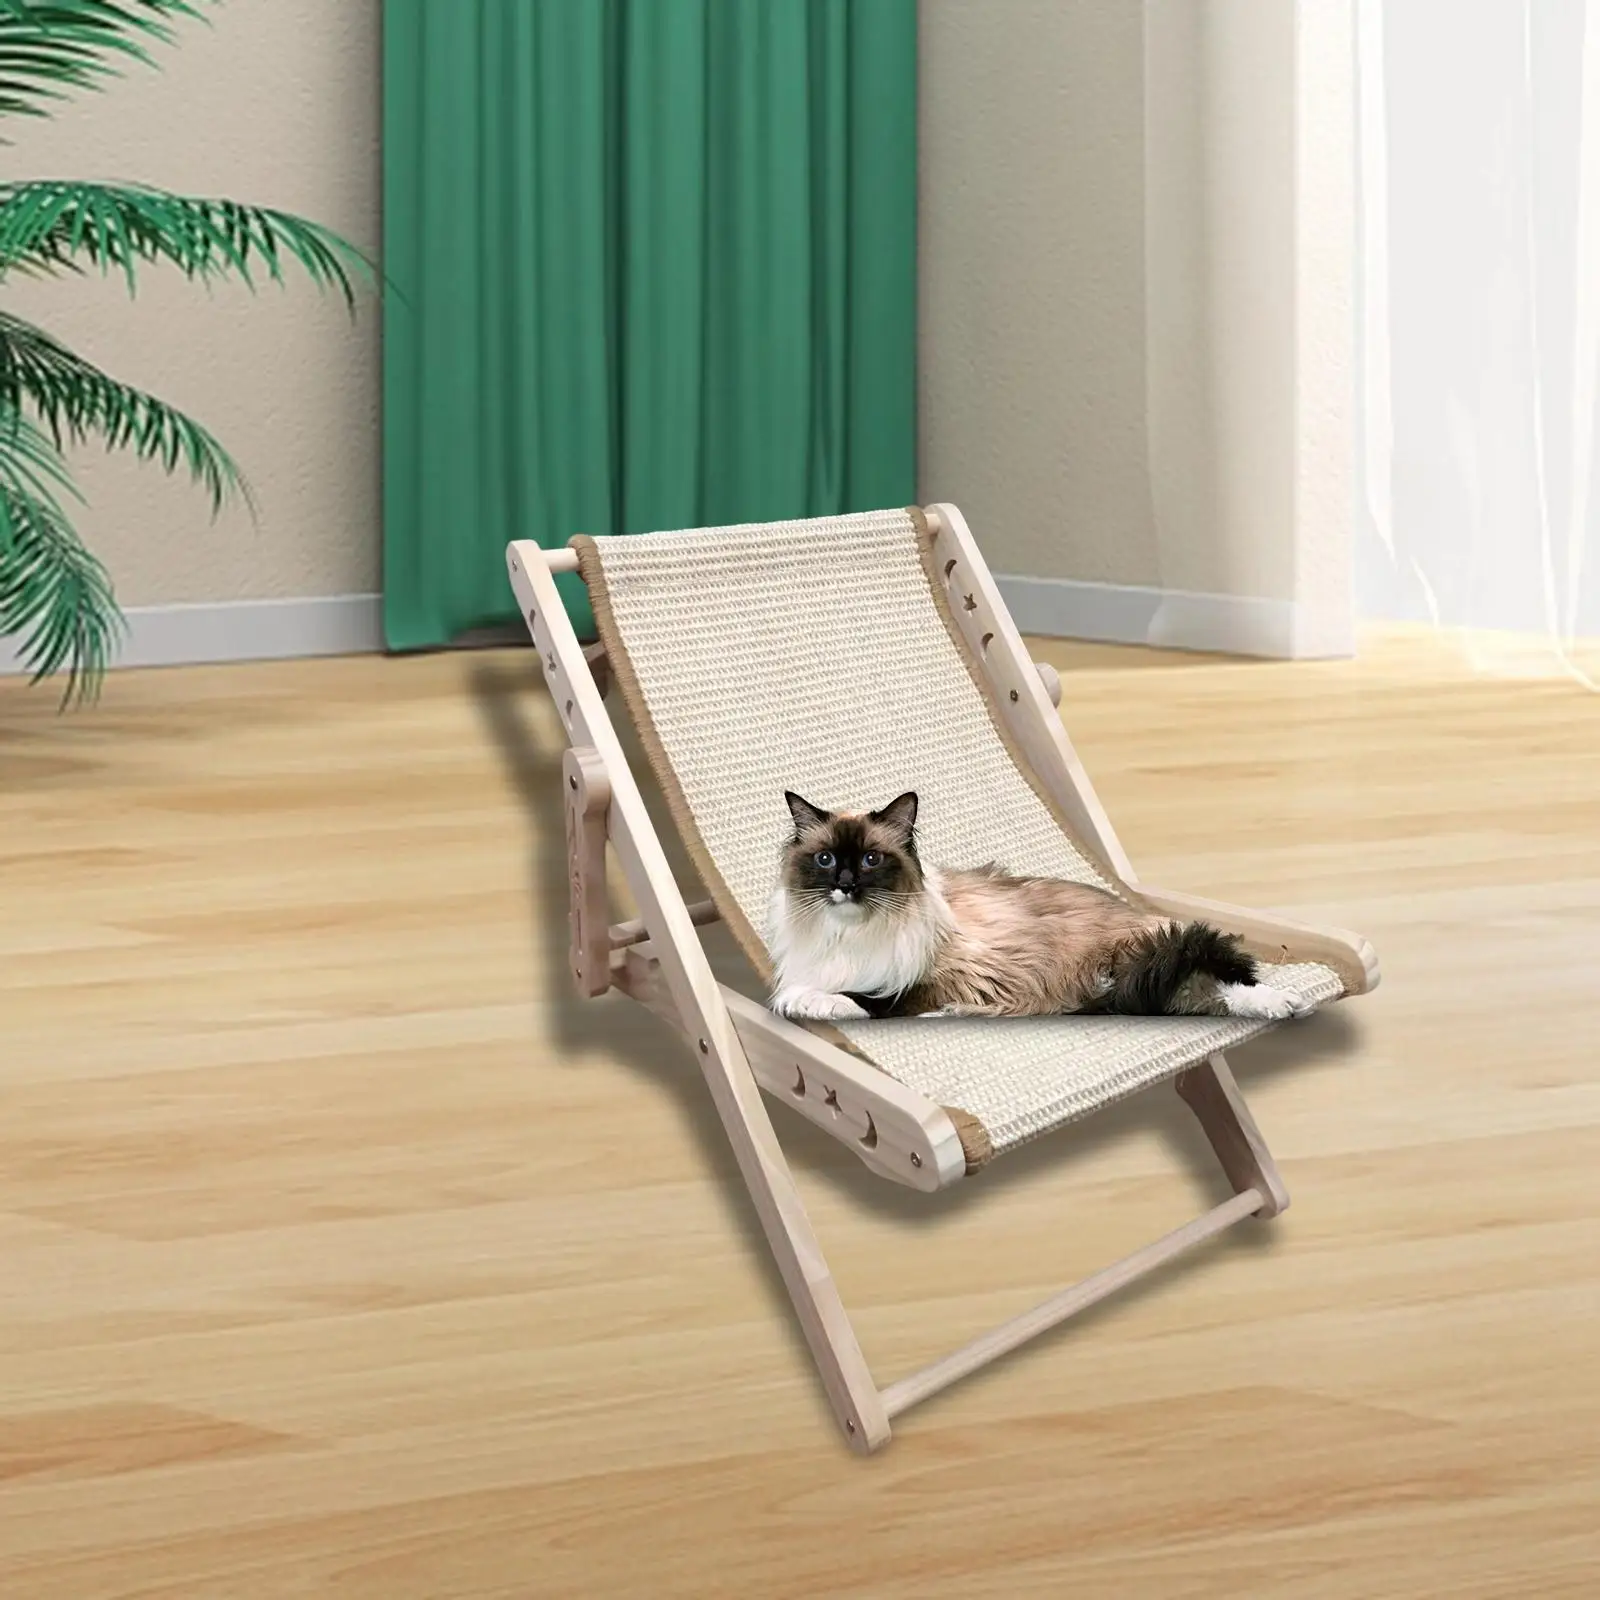 Cat Lounge Chair Modern Furniture Comfortable Sleeping Cats Raised Bed Cat Hammock Bed for Puppy Small Animal Bunny Dogs Rabbit